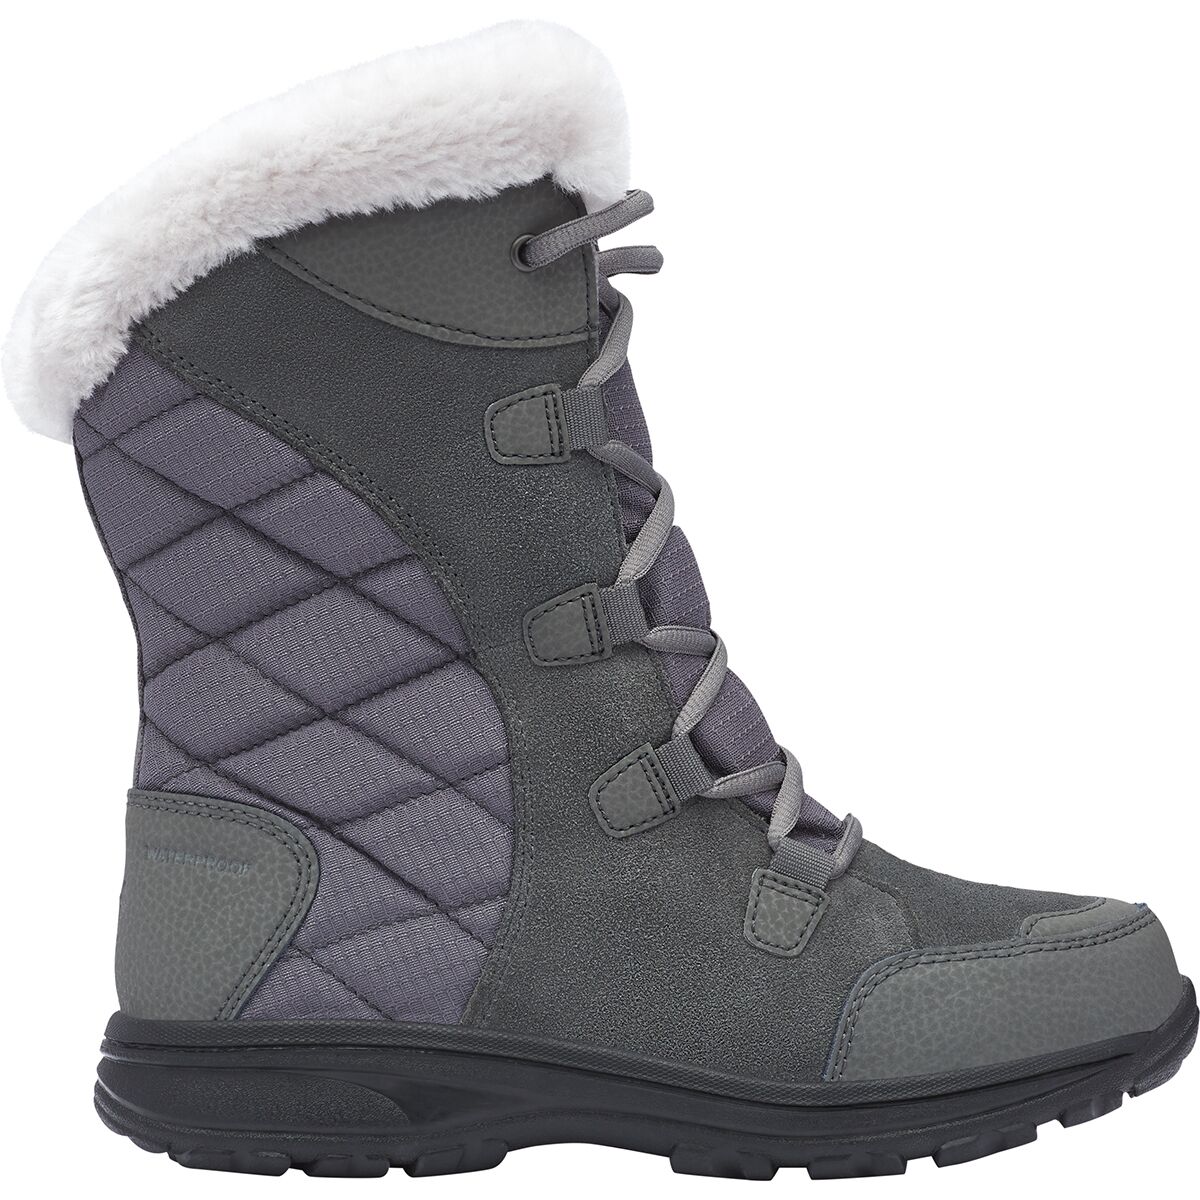 Columbia Ice Maiden II Lace Boot - Women's | Backcountry.com